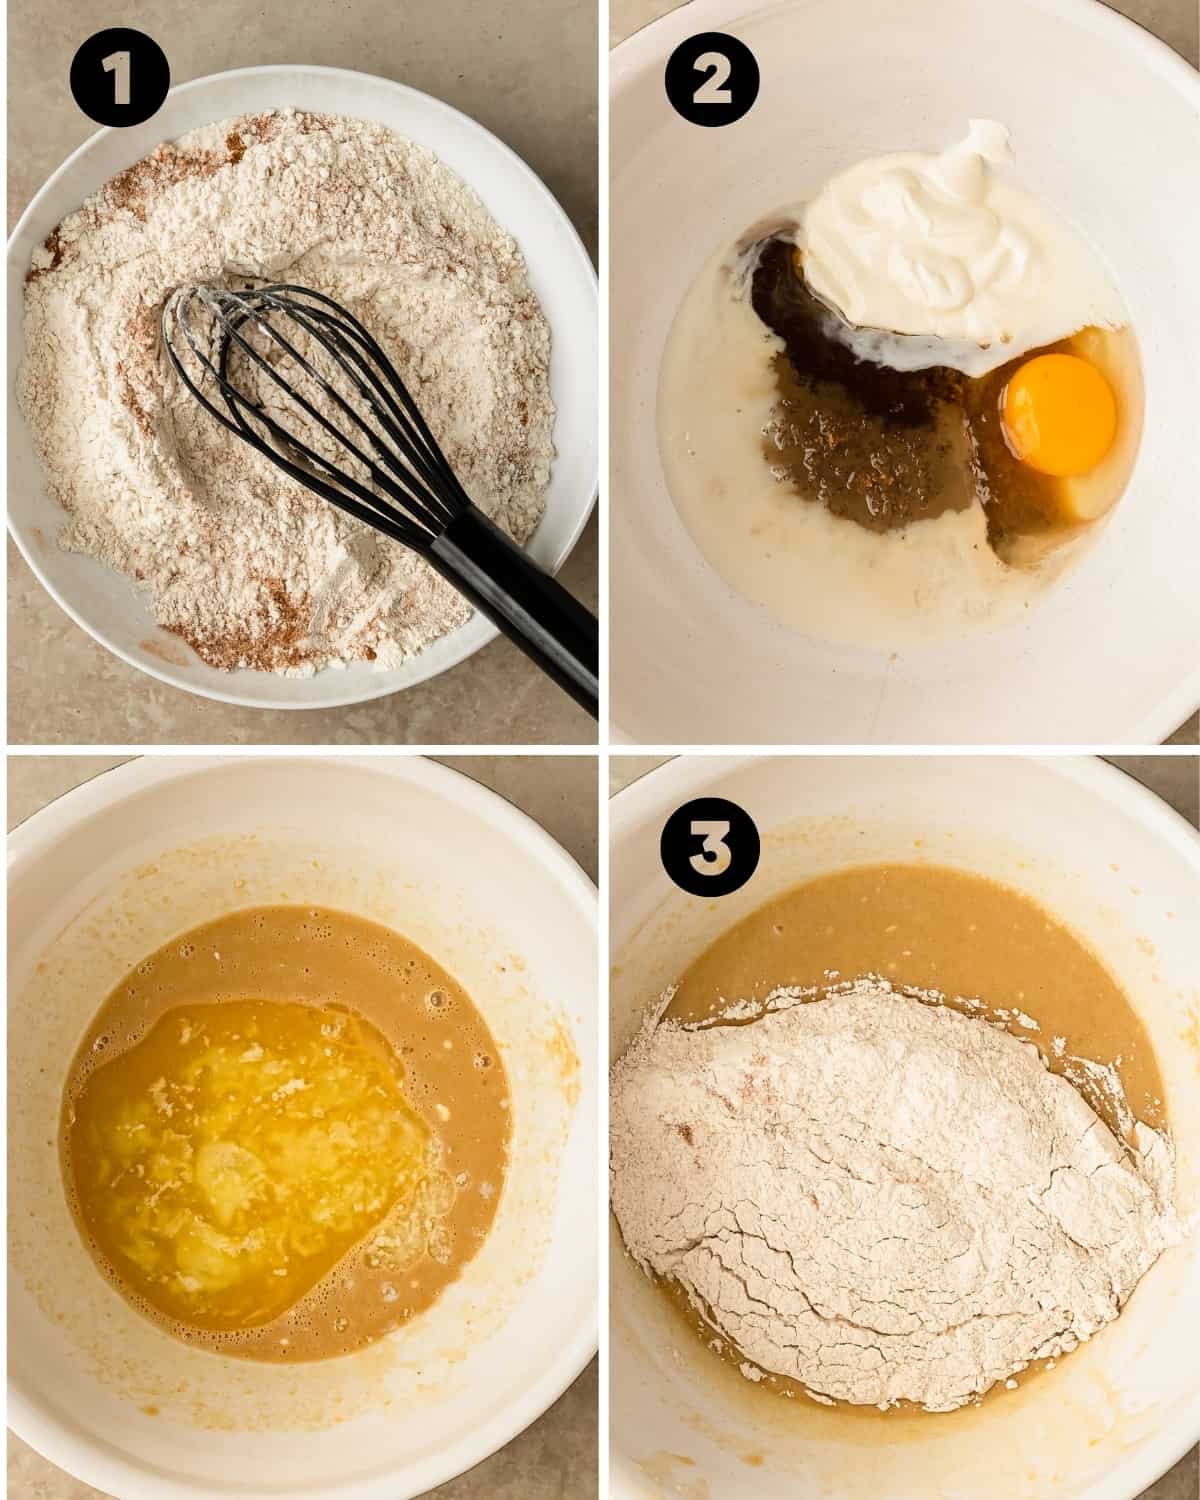 Steps to make cinnamon sugar baked donuts. Whisk the dry ingredients together. In another bowl whisk the wet ingredients together. Fold the dry into the wet. 